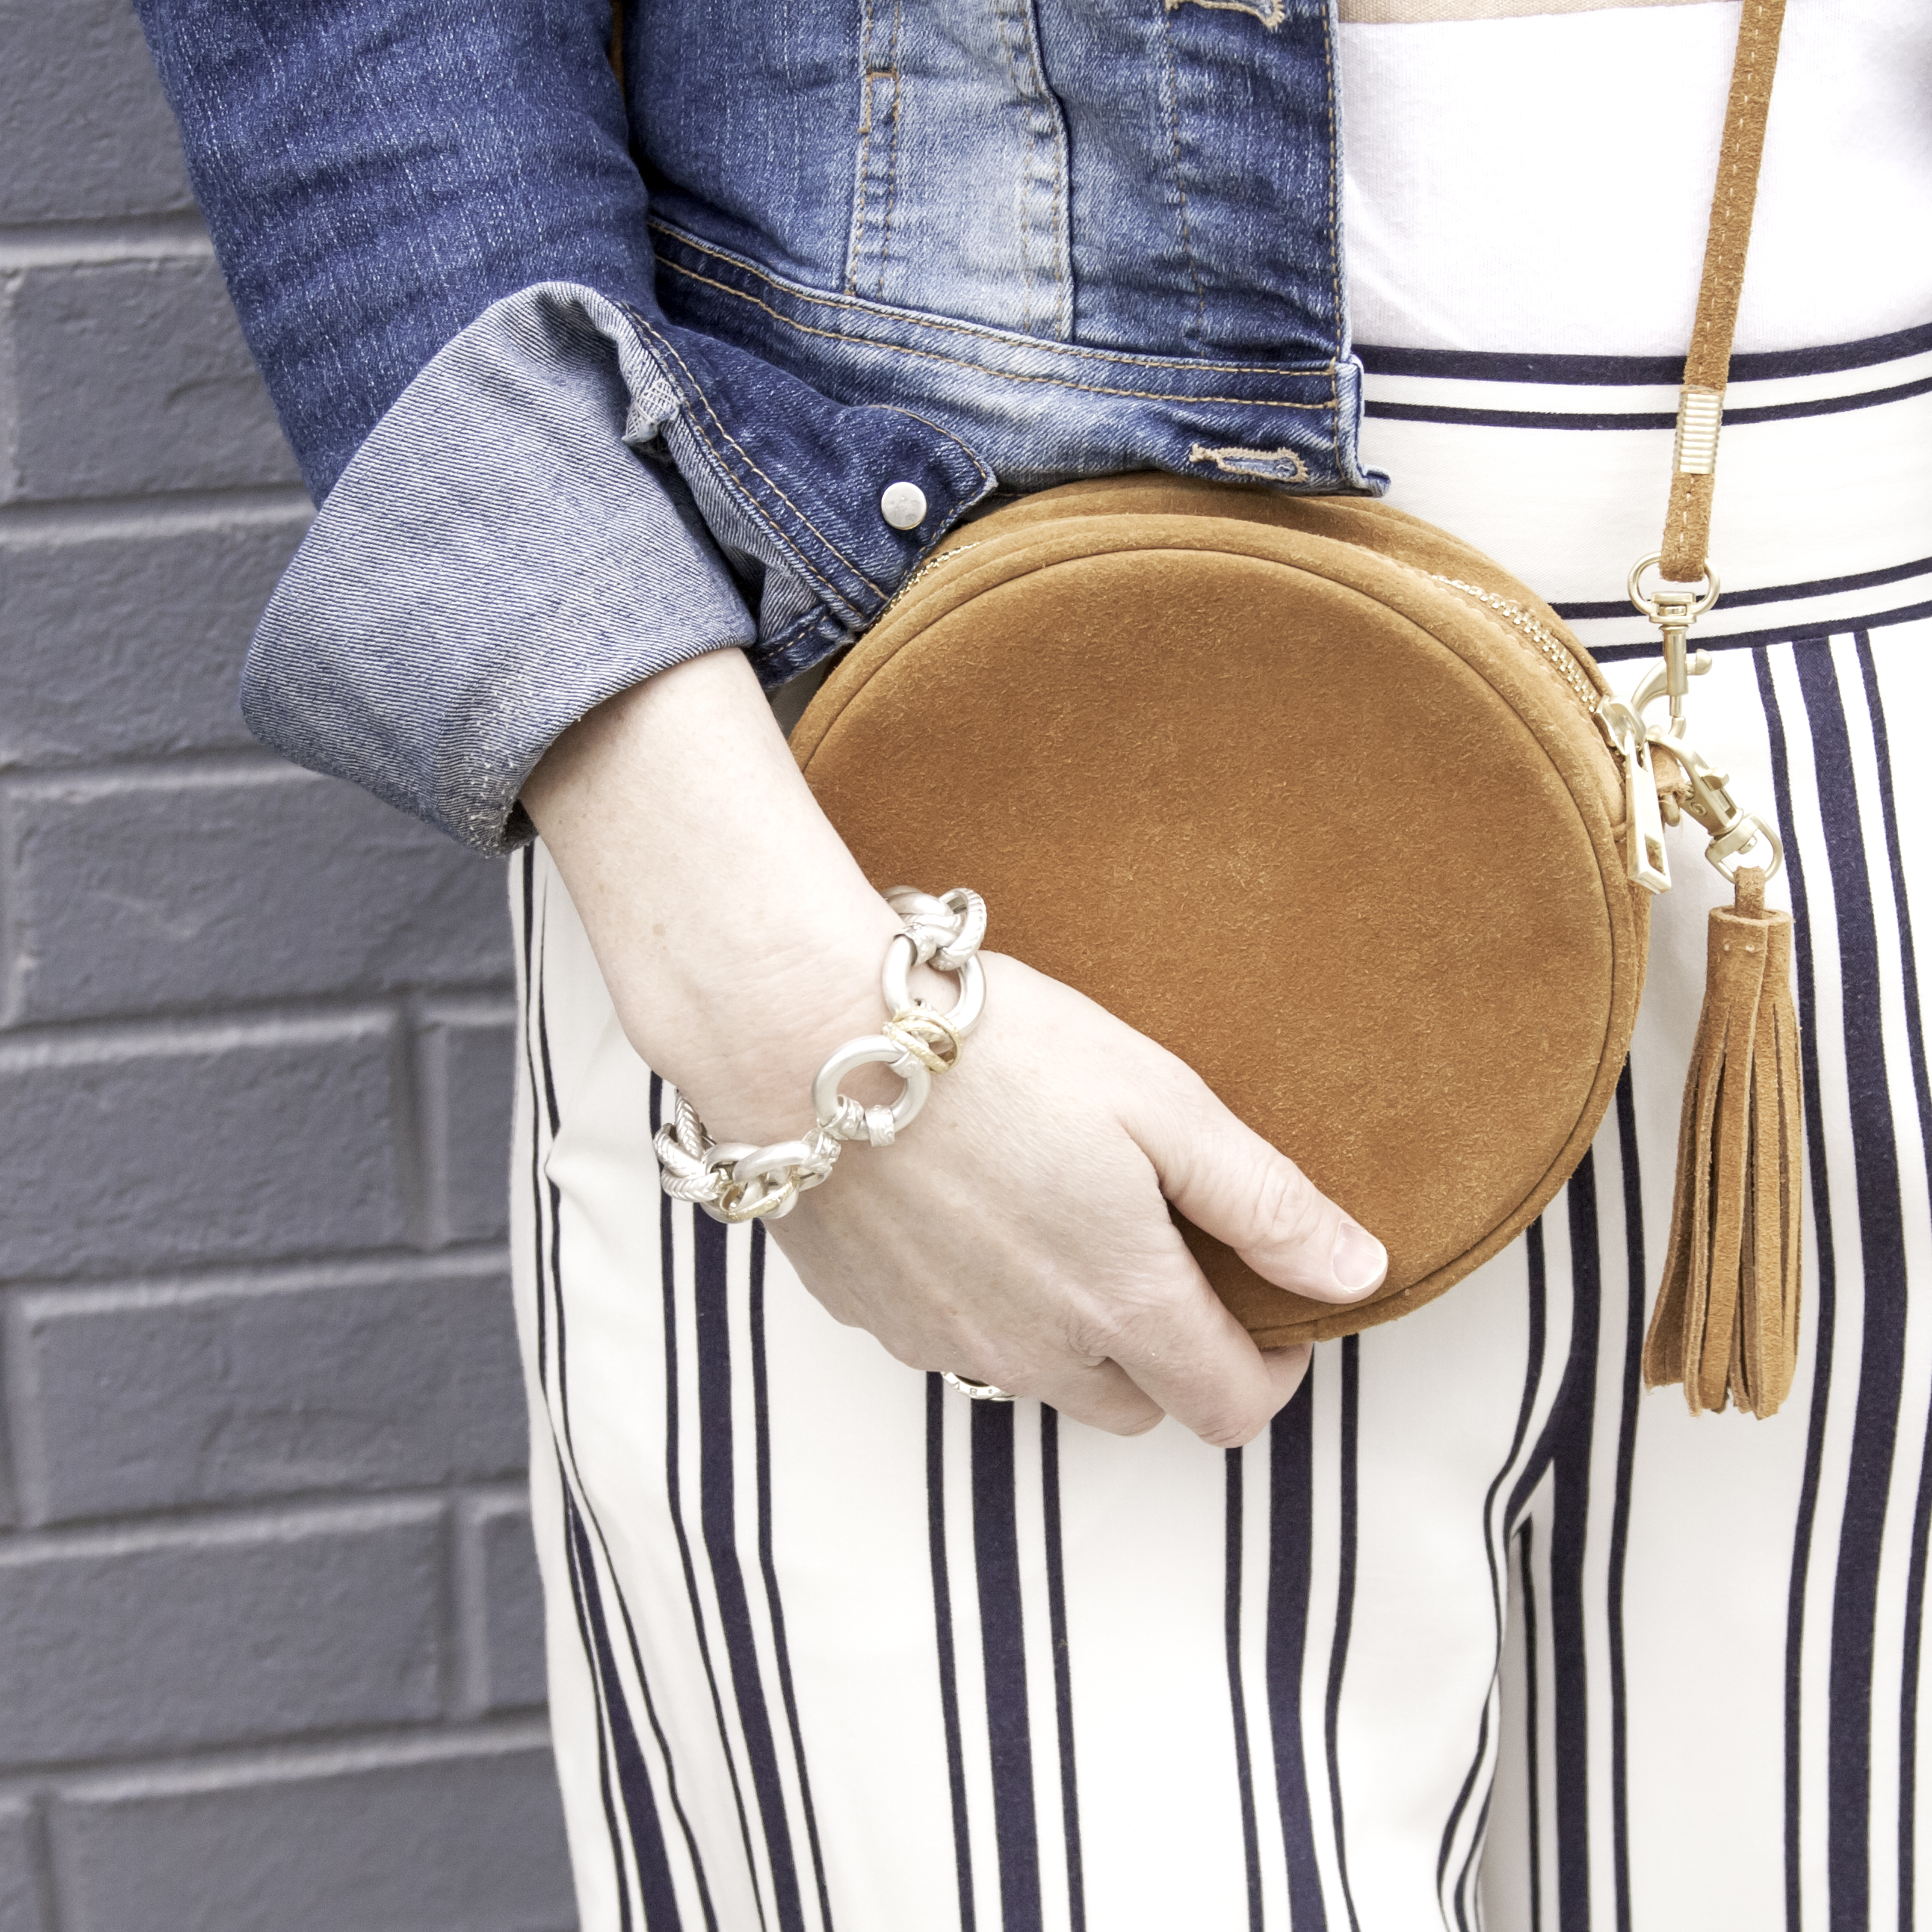 Spring Striped Chic Outfit